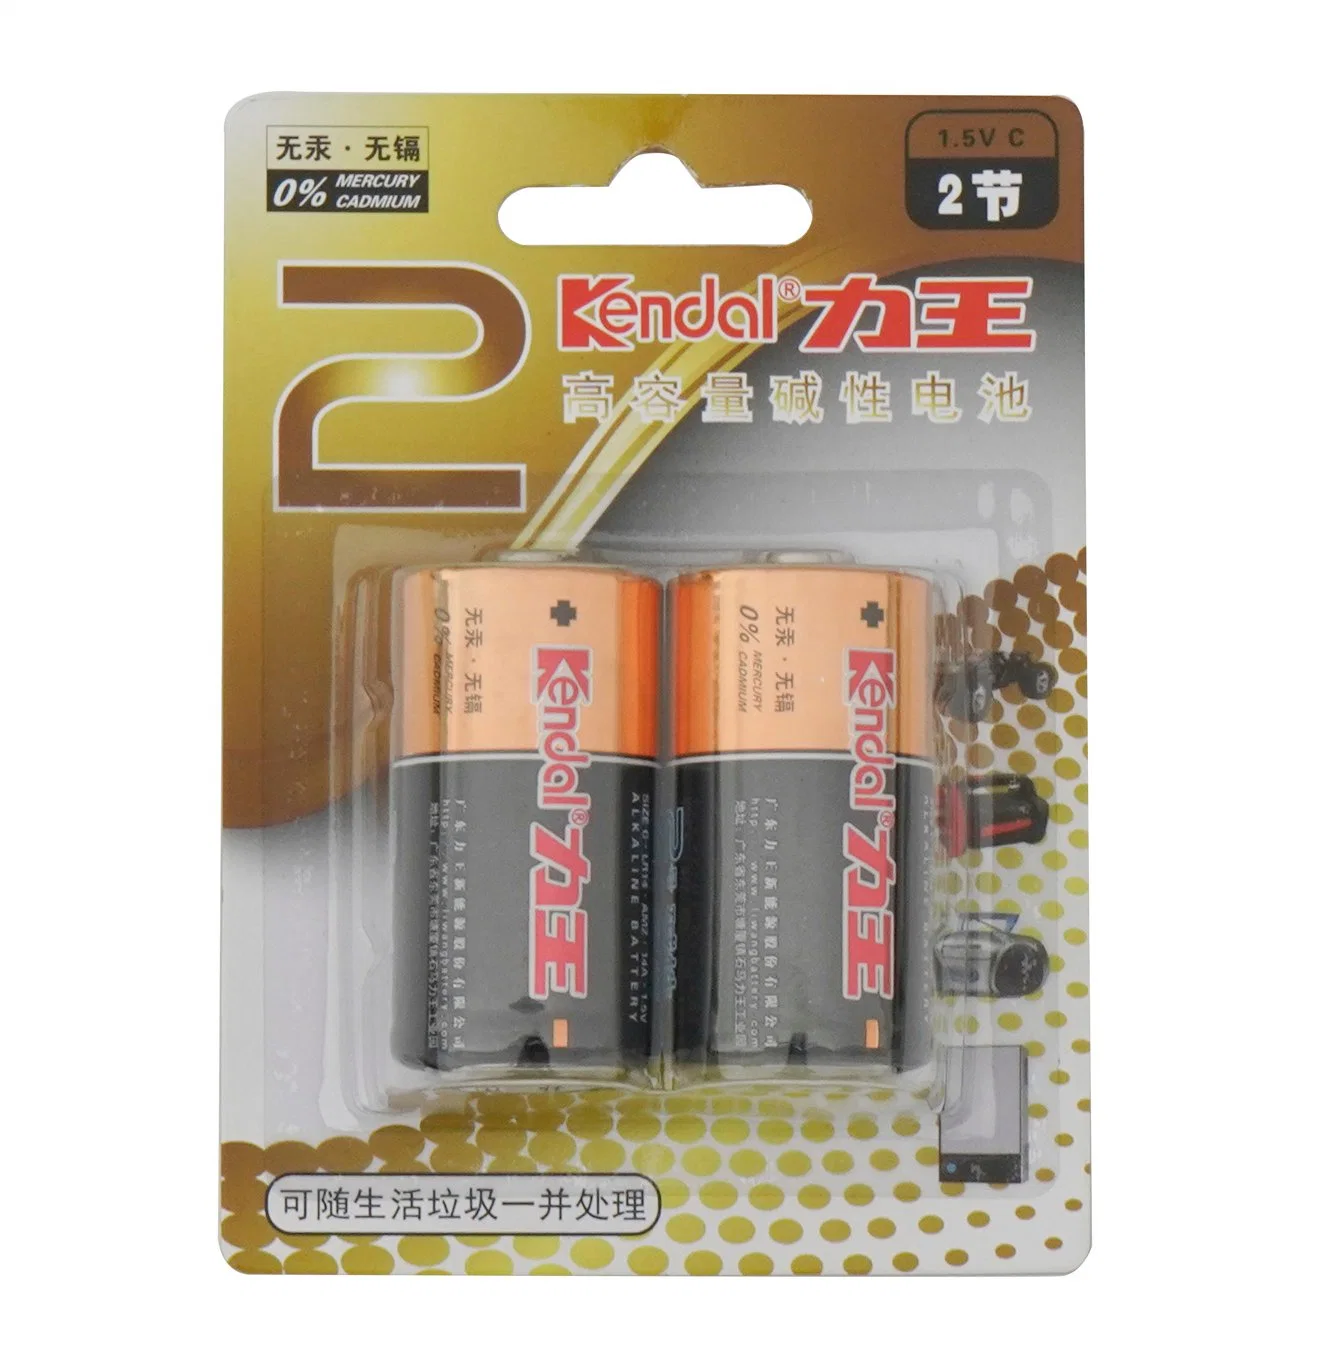 Super Long Lasting Disposable Primary Alkaline Batteries Size C D AA AAA 9V Dry Cell Battery Lr14 Lr20 Lr6 Lr03 6lr61 Alkaline Battery 1.5V for Electronics